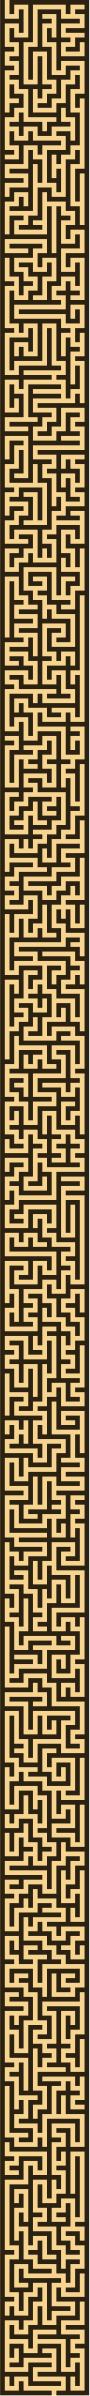 The Block Version of the Thin Maze icons